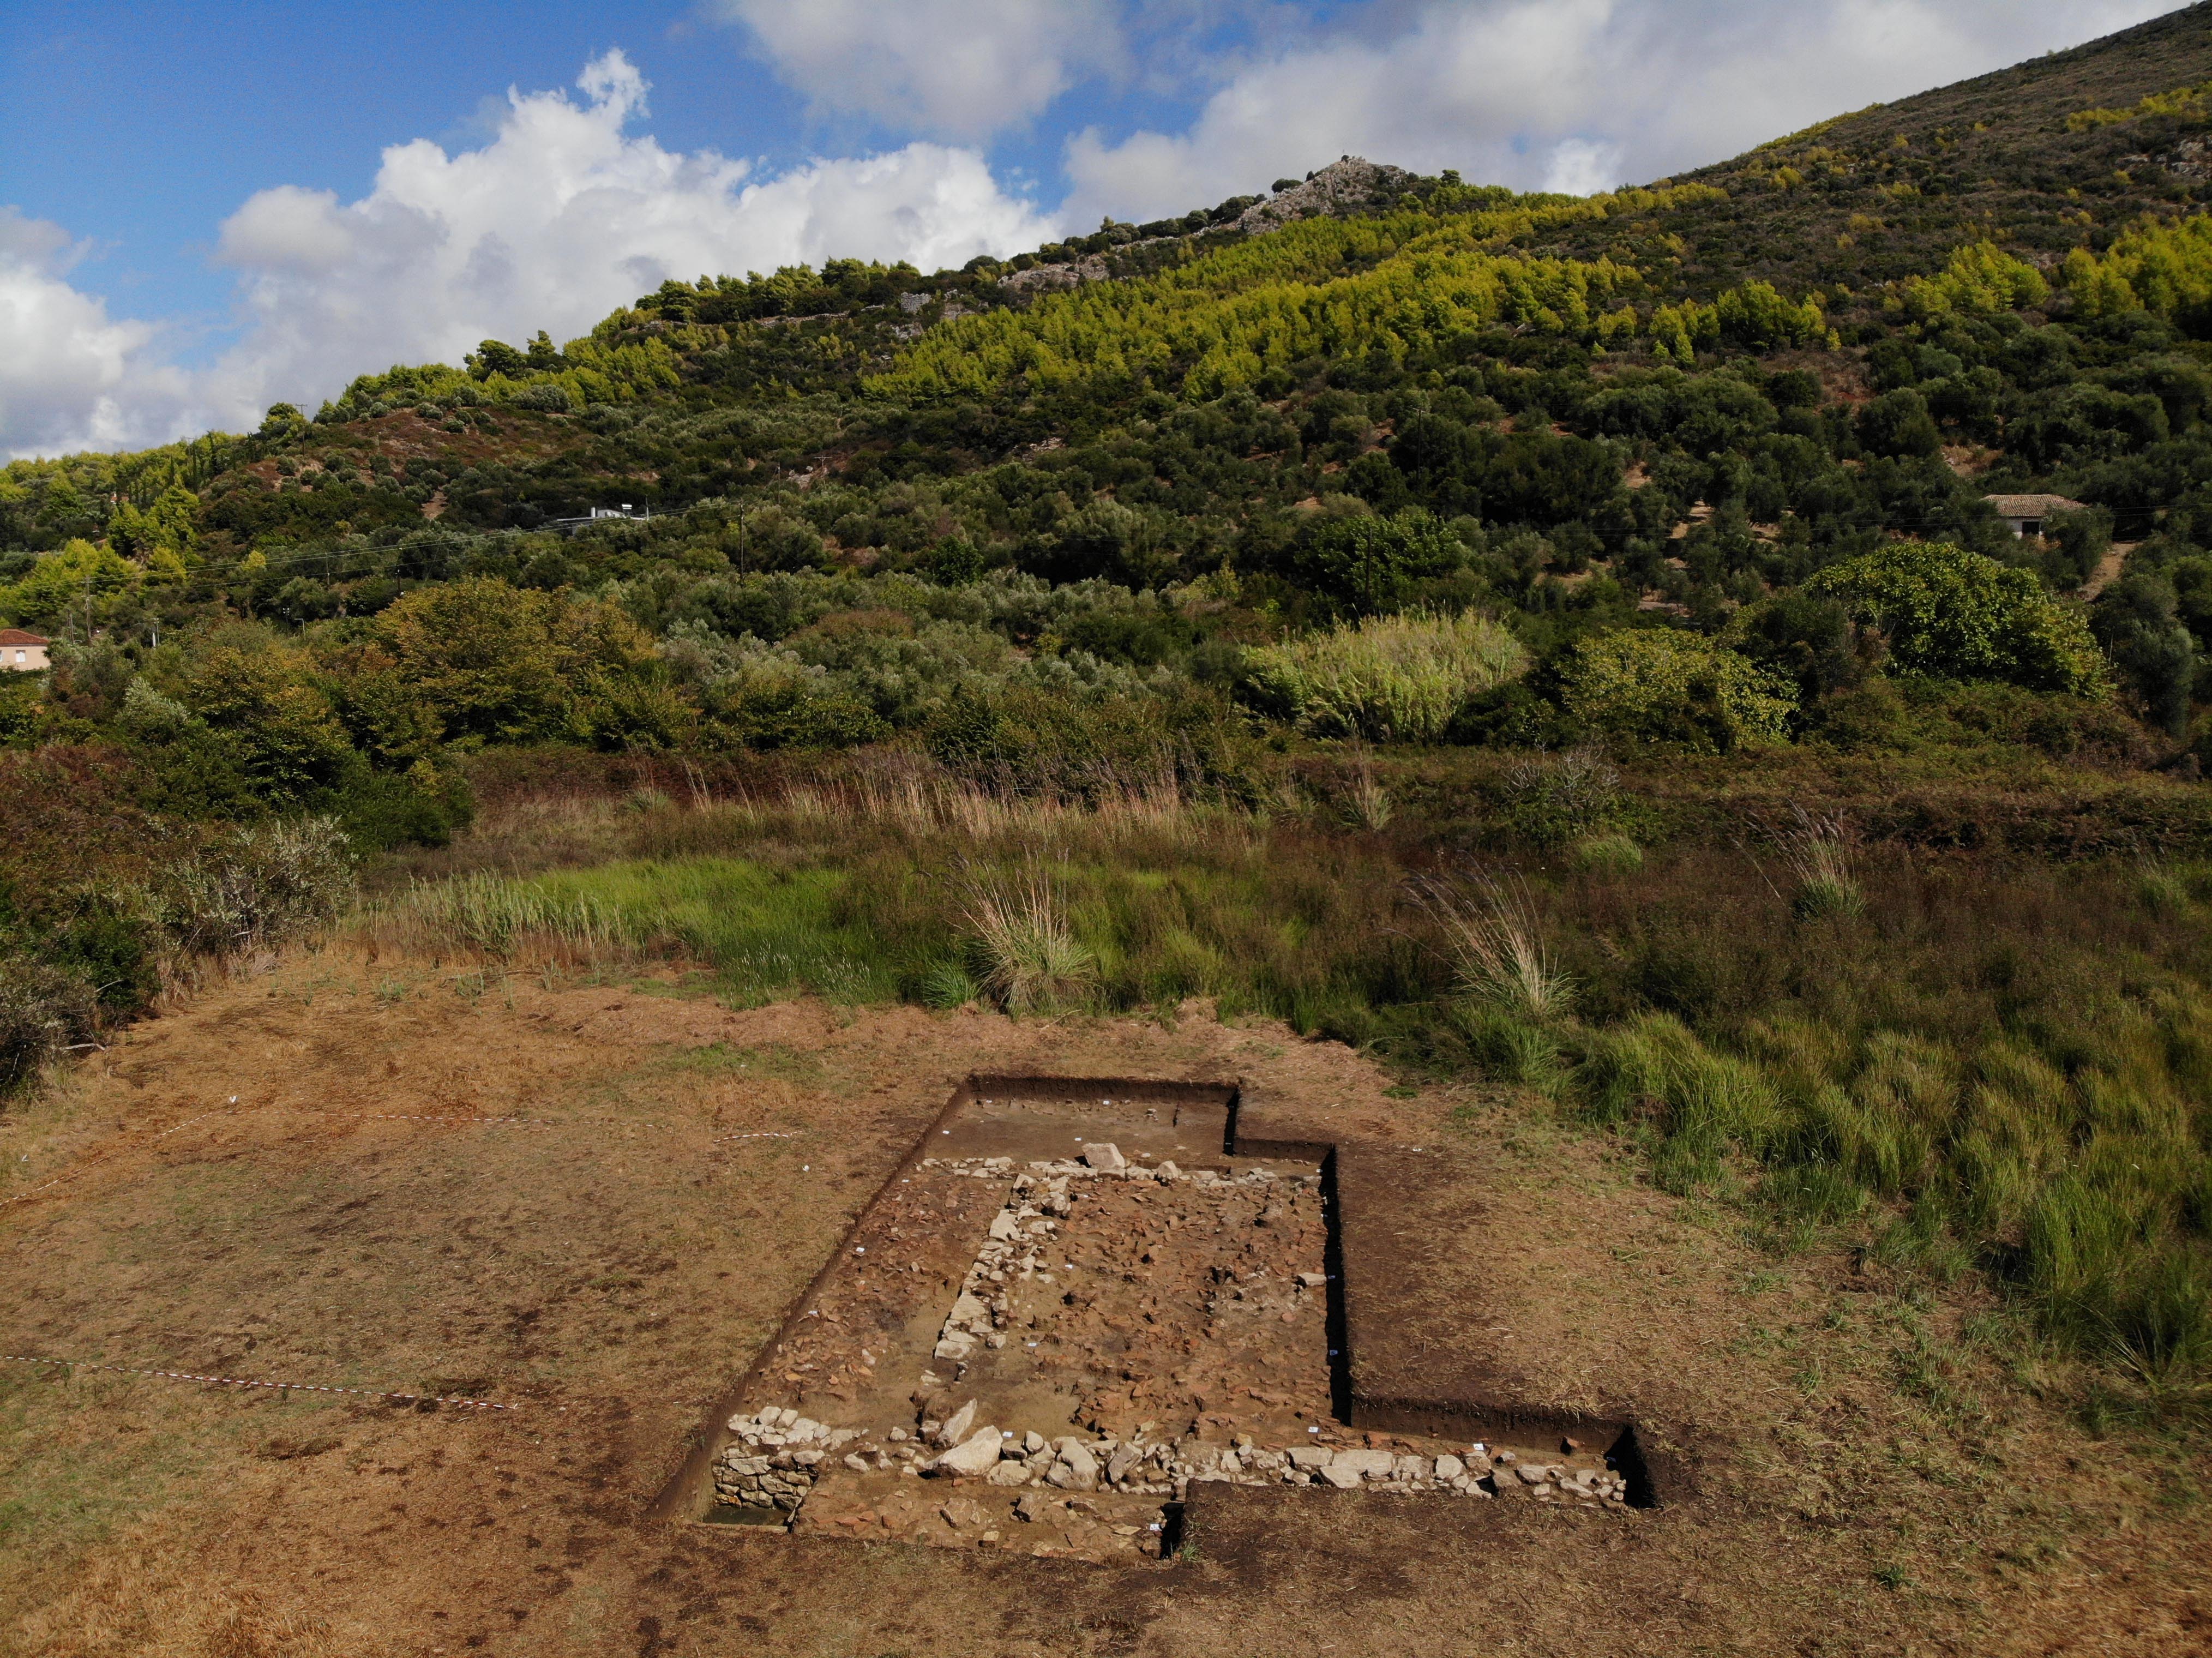 The famous ancient sanctuary has long been suspected in the plain below the ancient fortress of Samikon, which dominates the landscape from afar on a hilltop north of the lagoon of Kaiafa on the west coast of the Peloponnese. (photo/©: Dr. Birgitta Eder / Athens Branch of the Austrian Archaeological Institute)